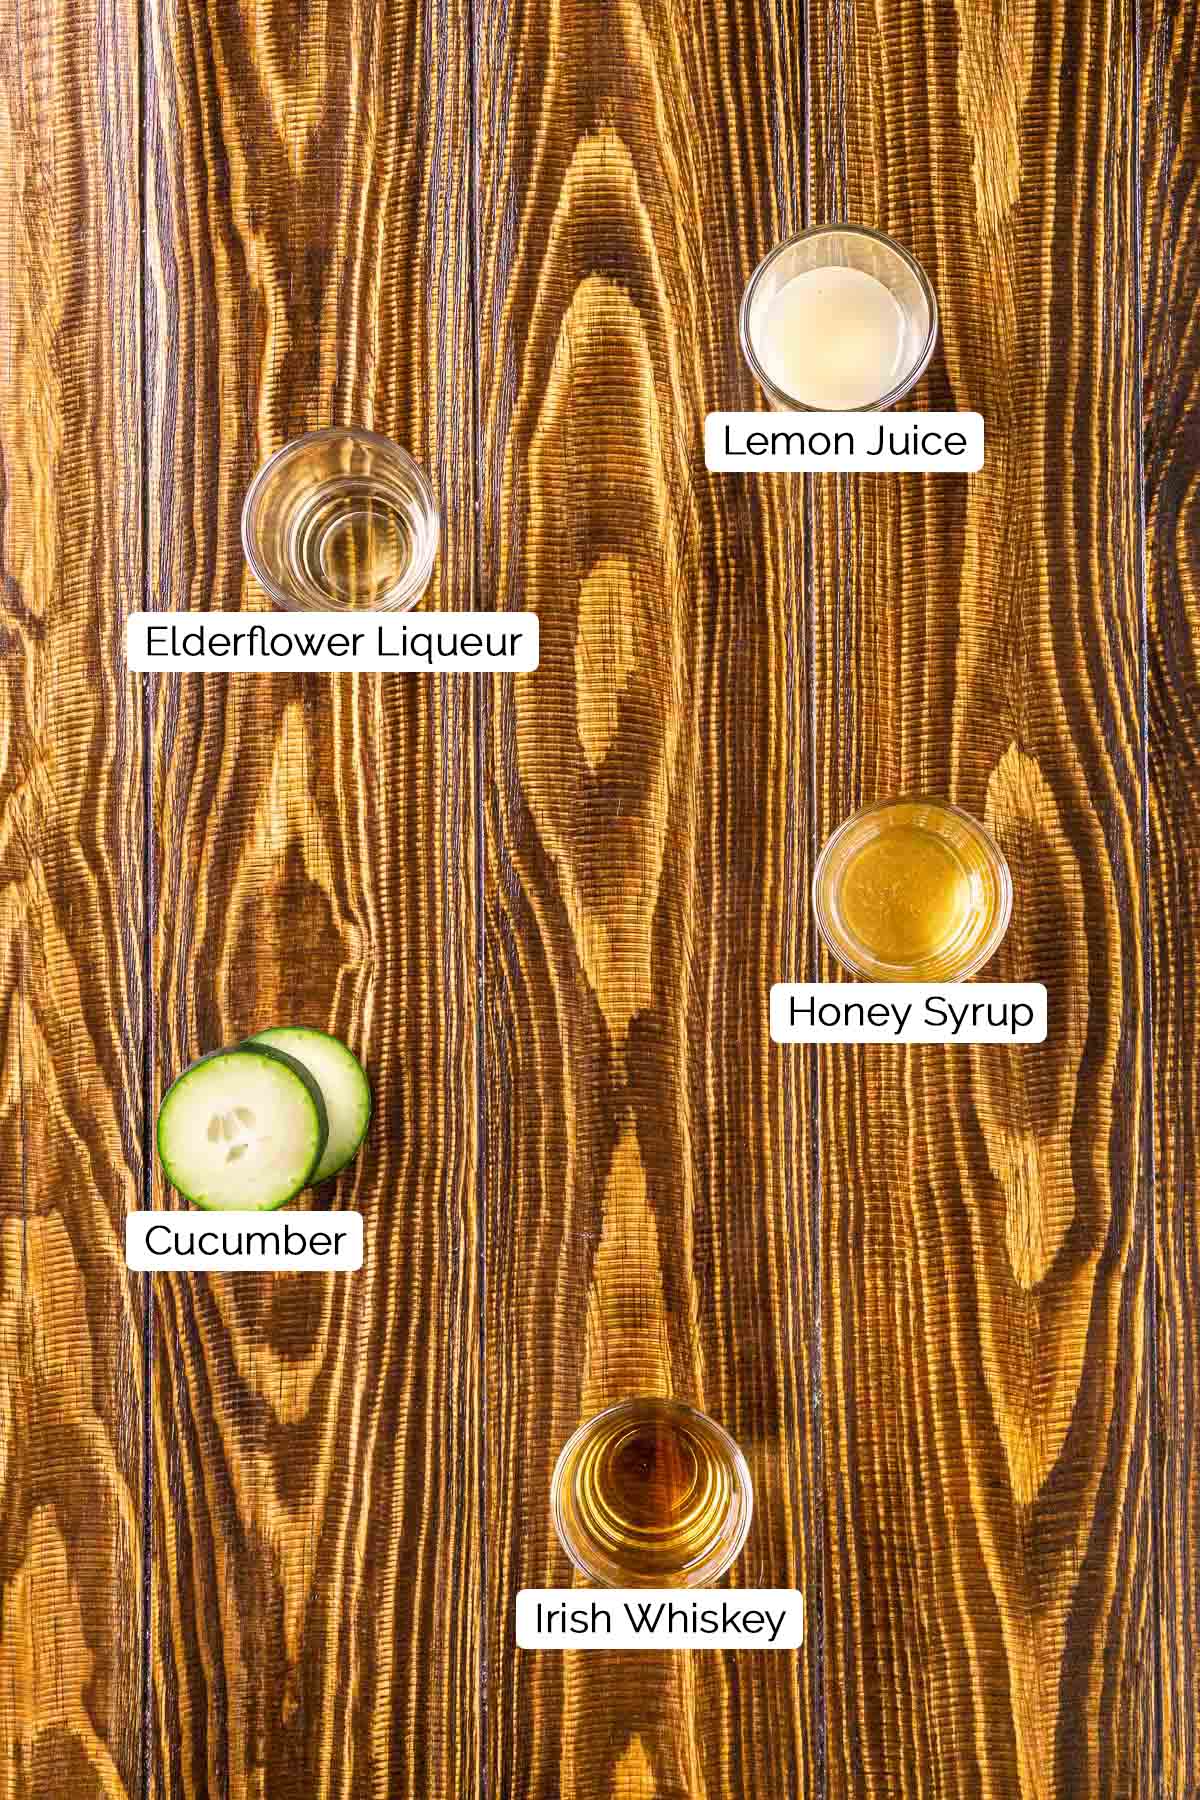 The drink ingredients in shot glasses on a brown wooden surface with white and black labels underneath the five items.